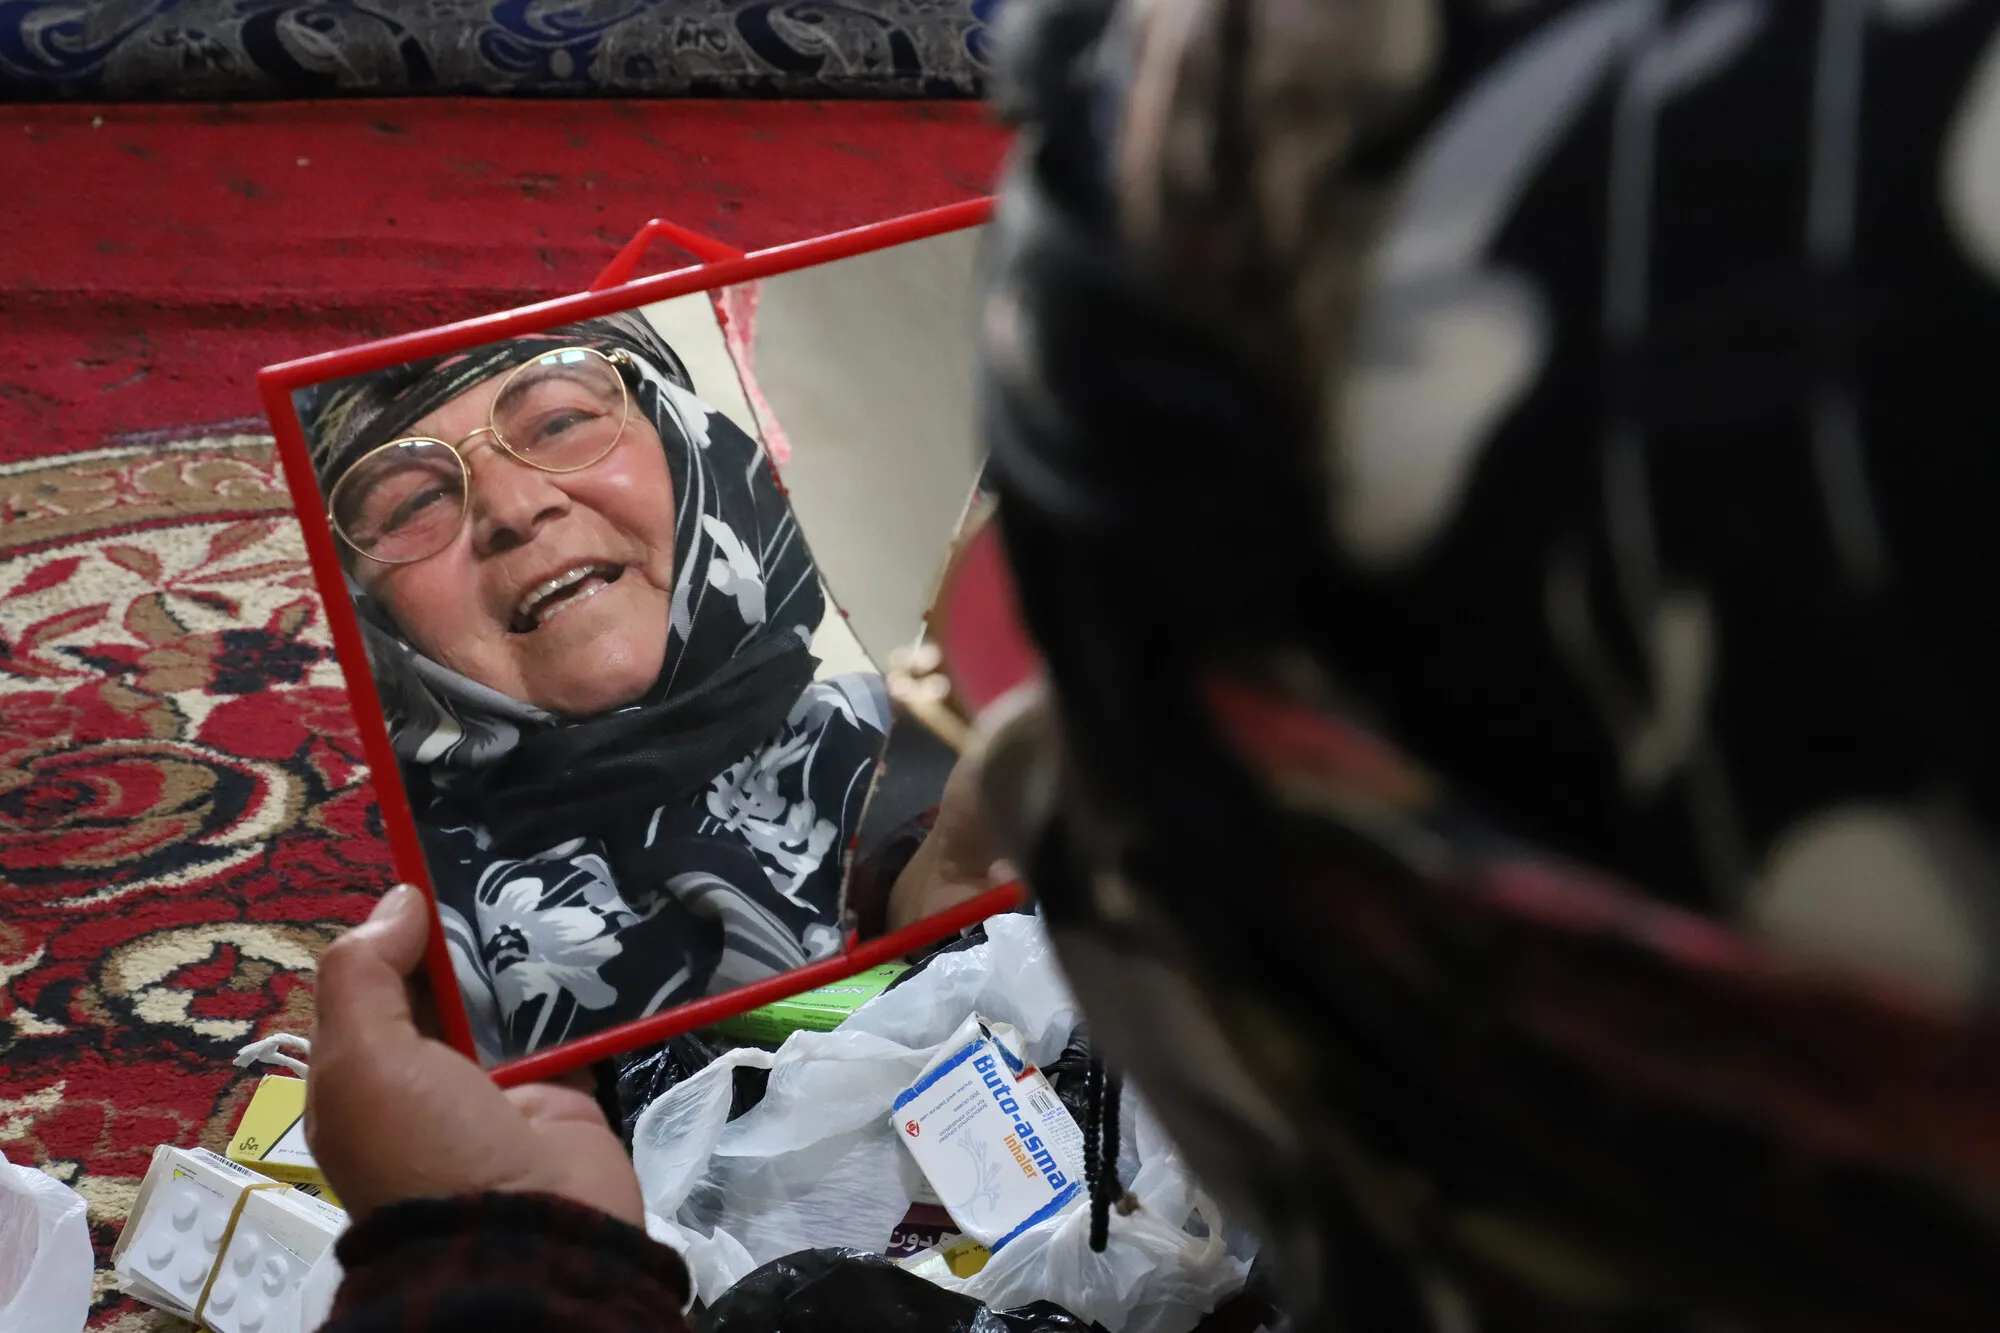 An internally displaced Syrian woman in glasses holding a mirror and gazing at her own reflection with some medicines on her lap.